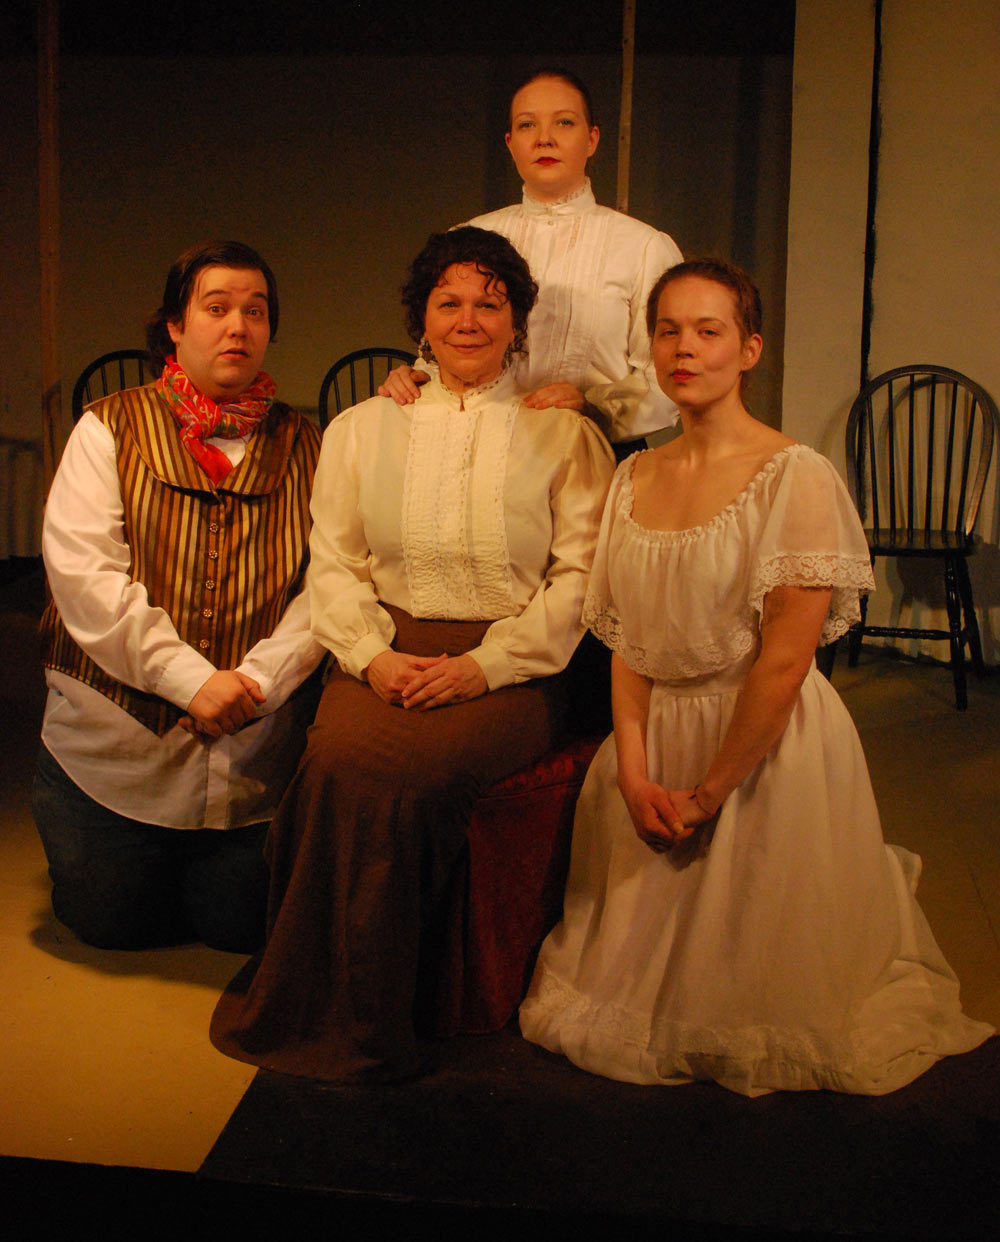 Justin Eberhard as Phillip, Joan Krause as Mrs Clandon, Aran Morris as Gloria, and Christina Yoho as Dolly in George Bernard Shaw's You Never Can Tell. 2